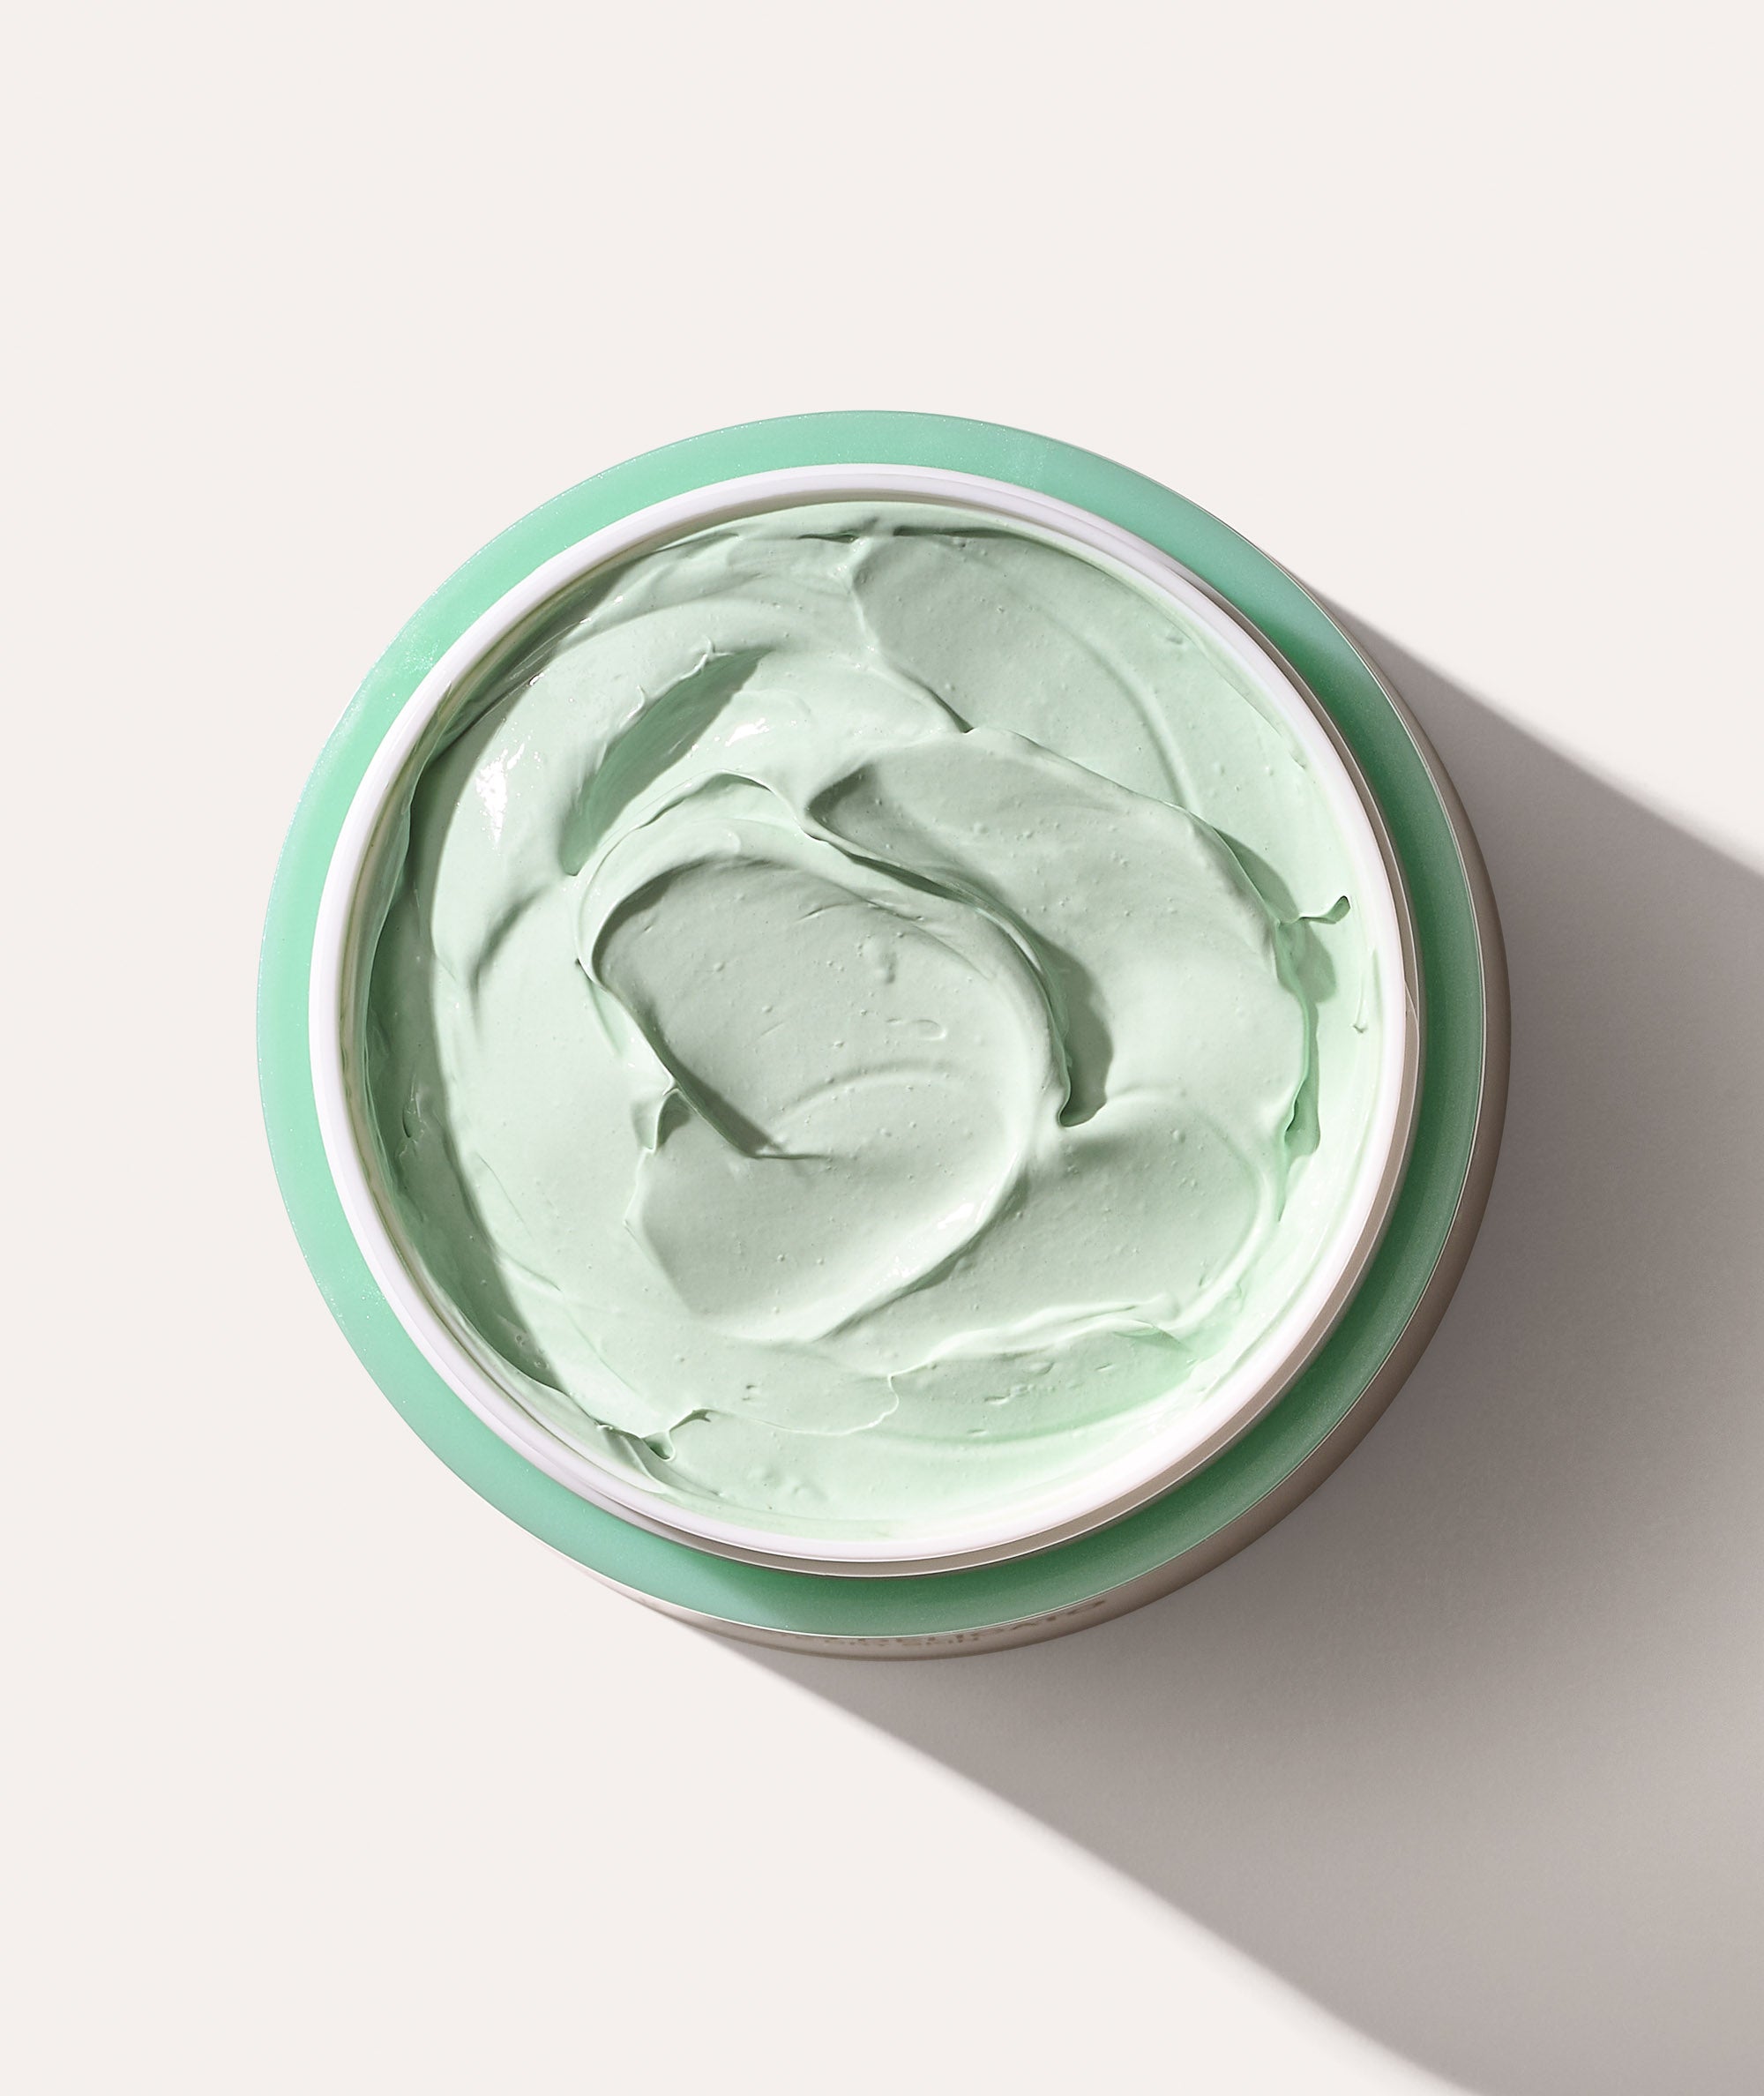 This is a picture of an open jar of the Borghese Advanced Fango Delicato Mud Mask